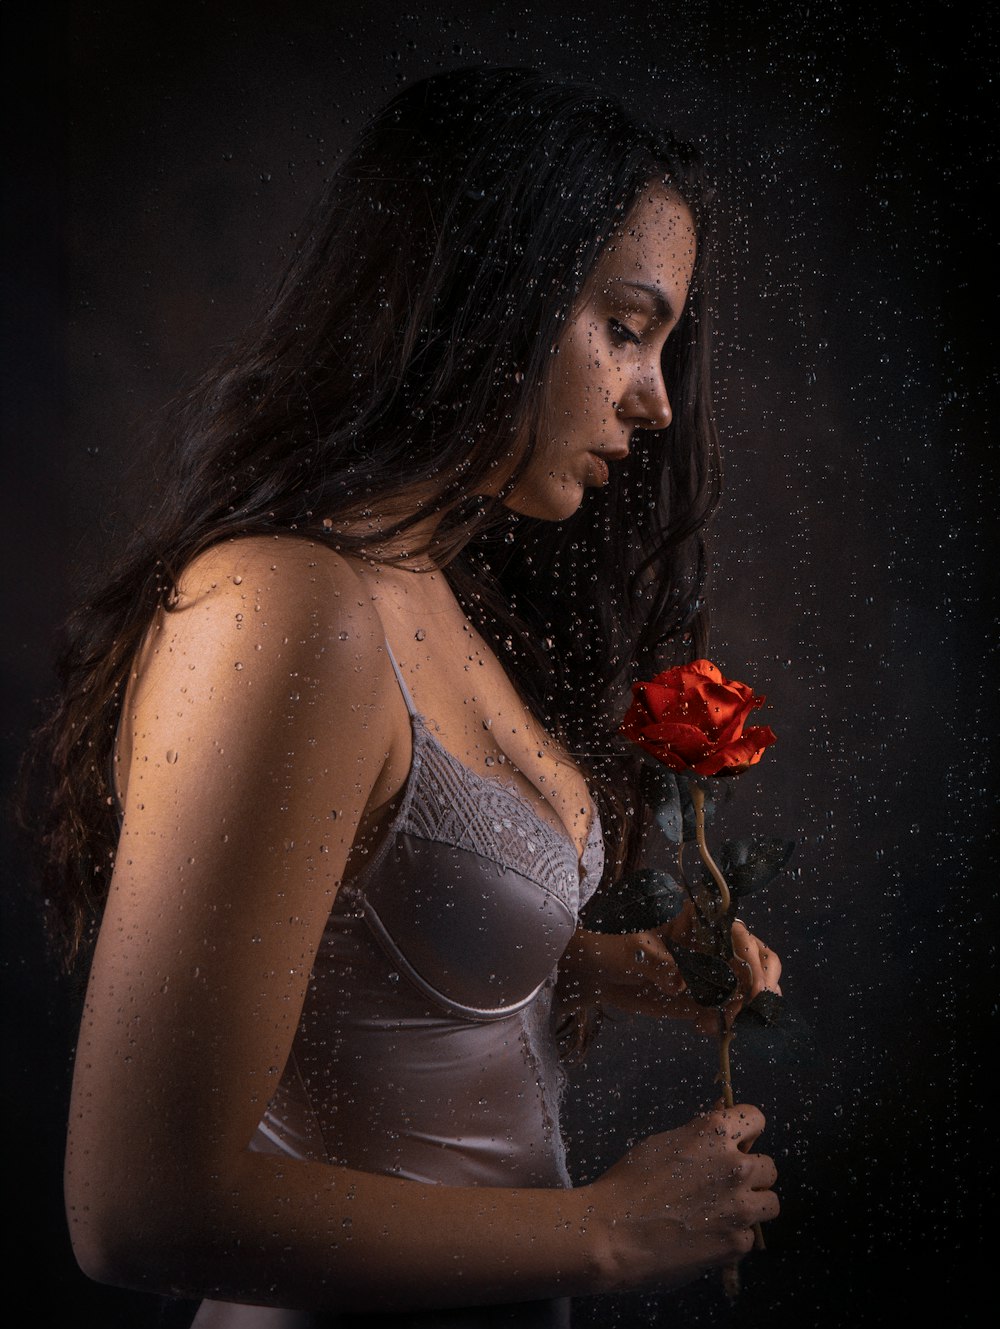 a woman holding a red rose in the rain